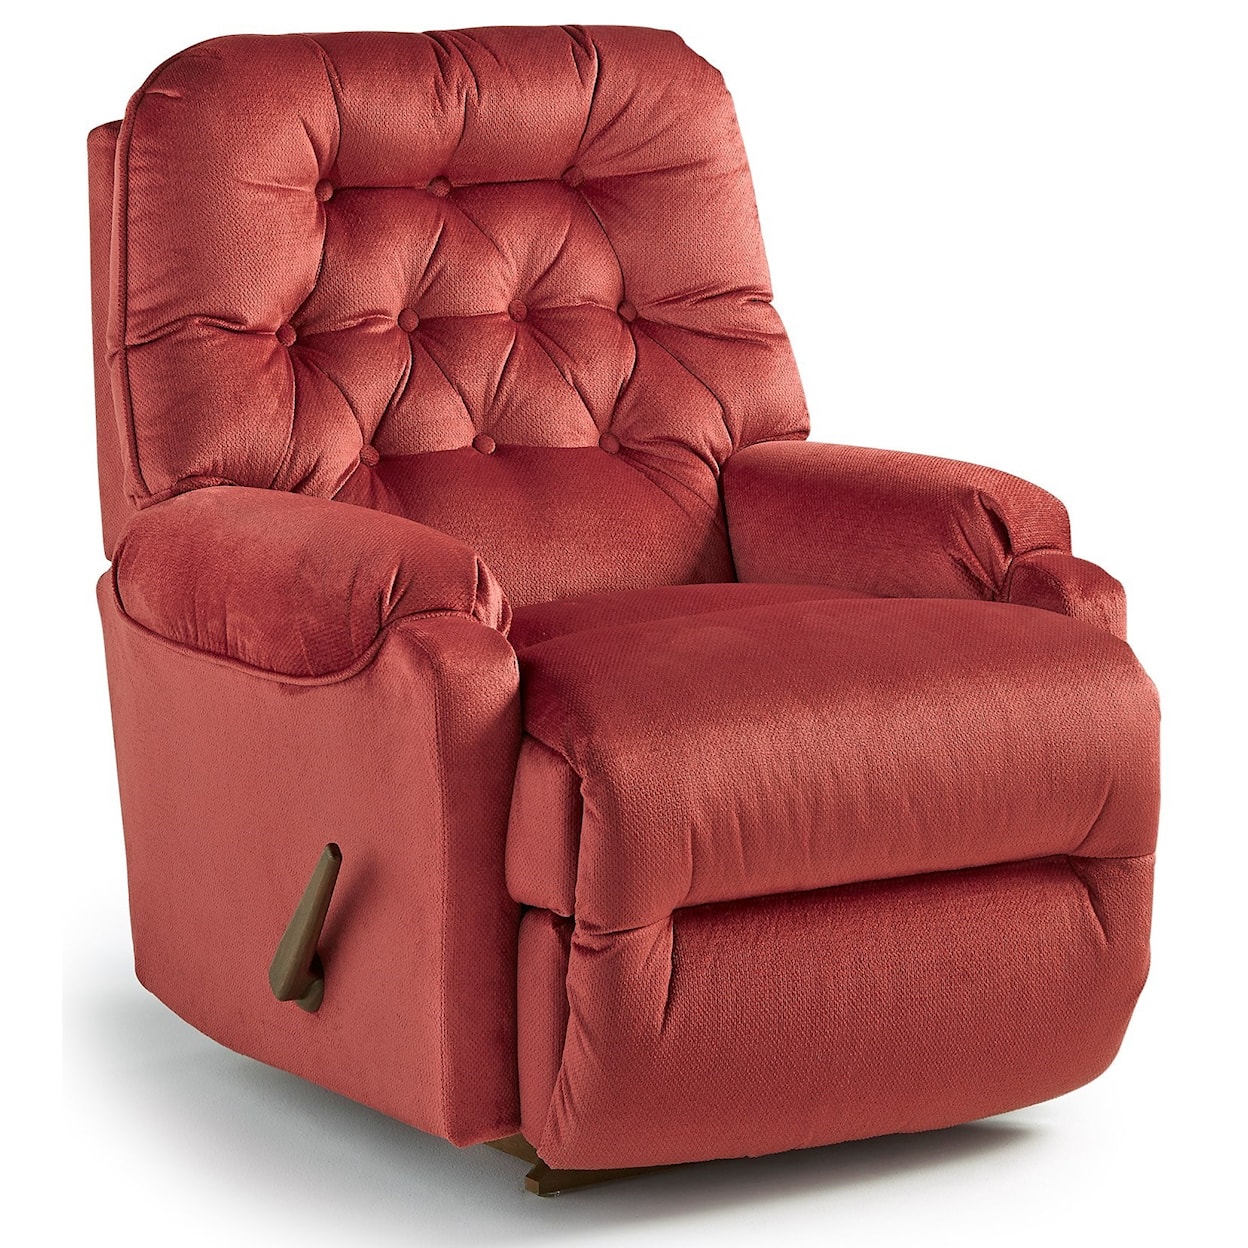 Best Home Furnishings Petite Recliners 9AW25 21338 Brena Swivel Glider  Recliner, Prime Brothers Furniture